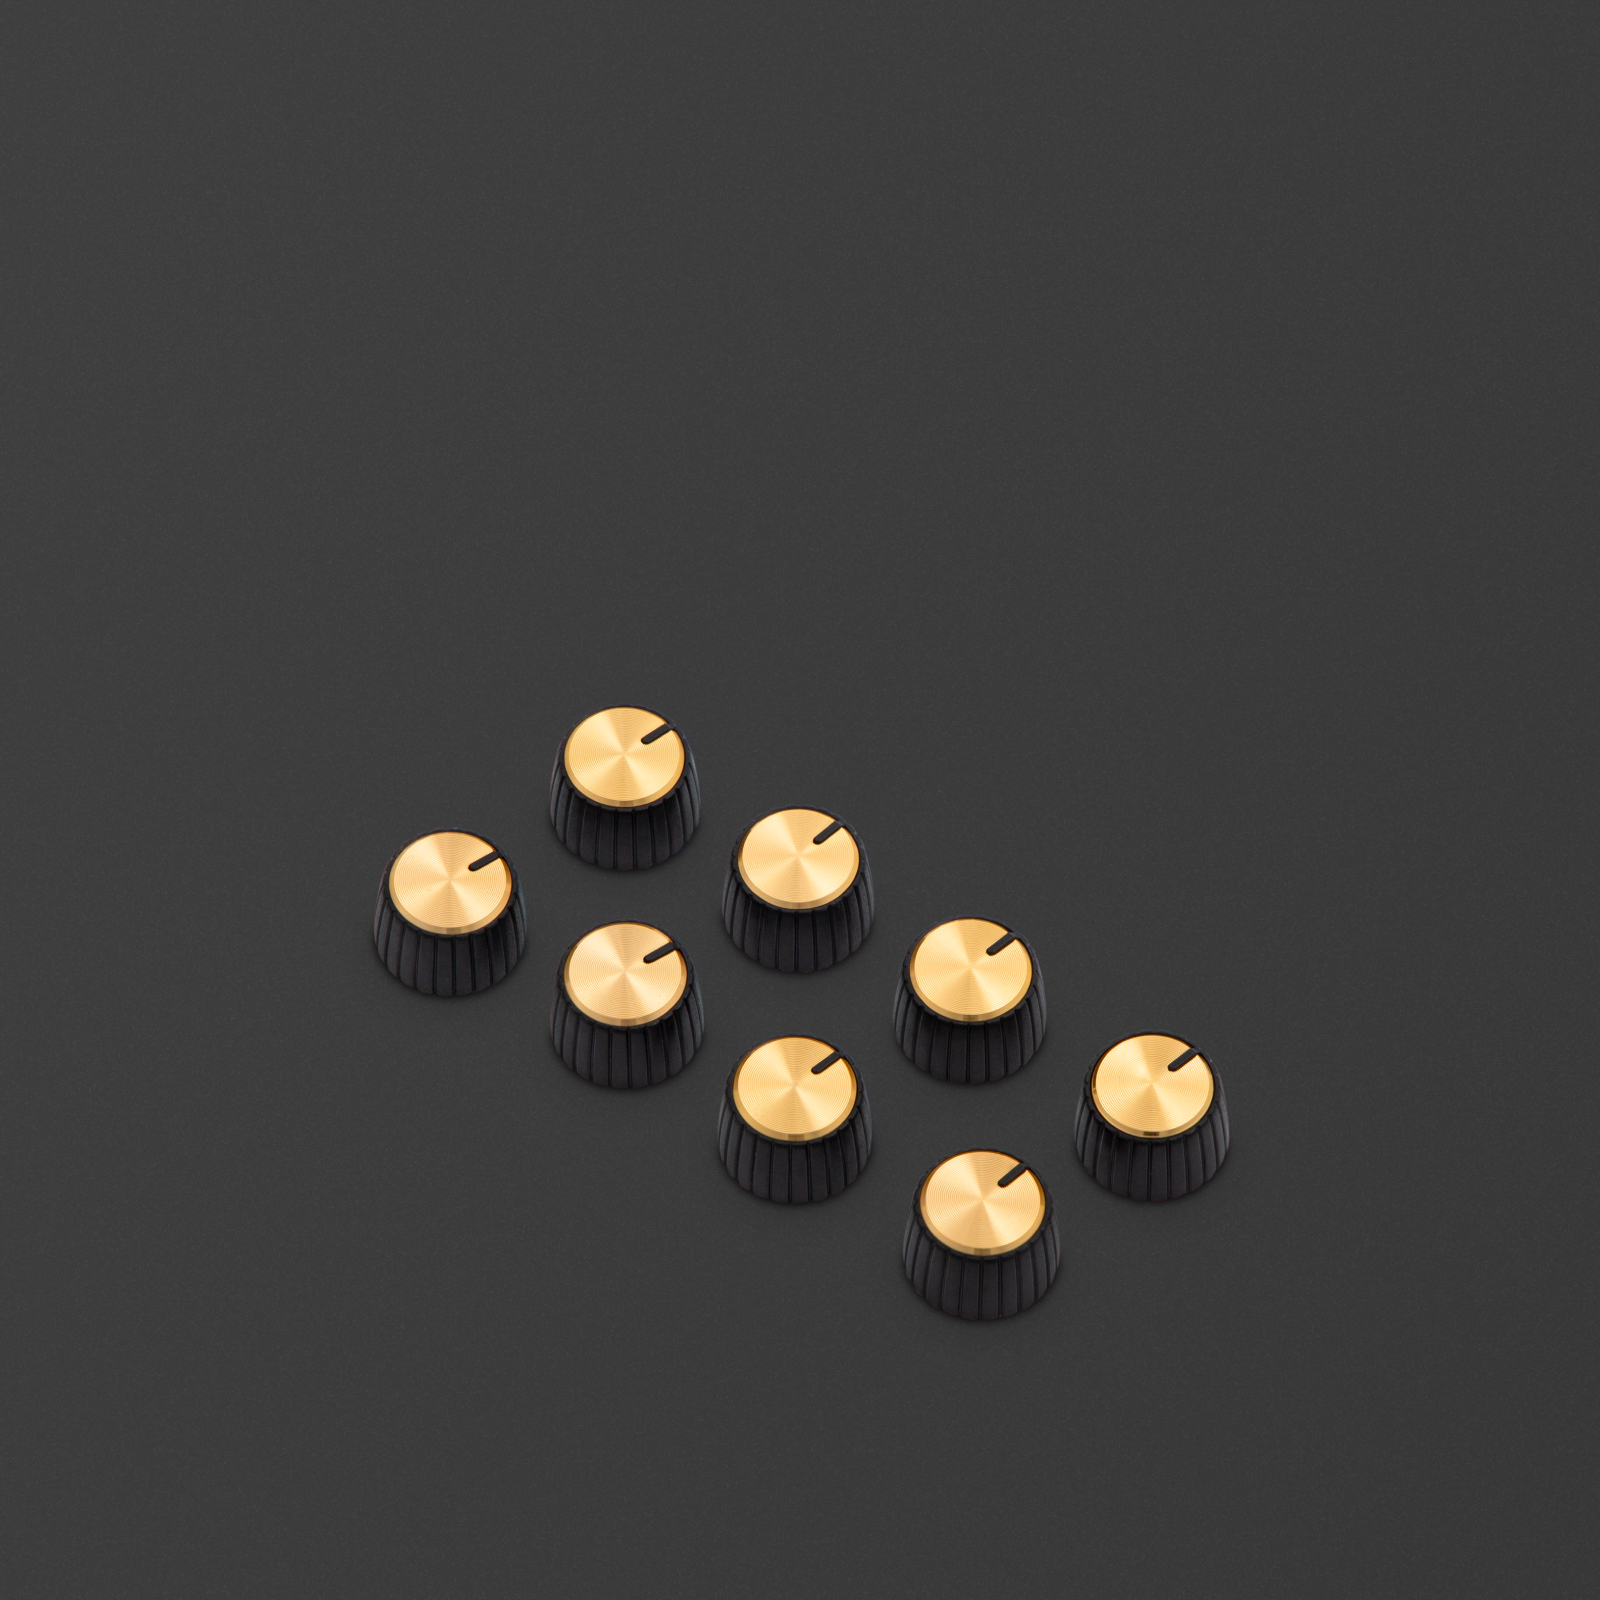 These knobs feature a black body, gold cap, and have a D-shaped push on profile.